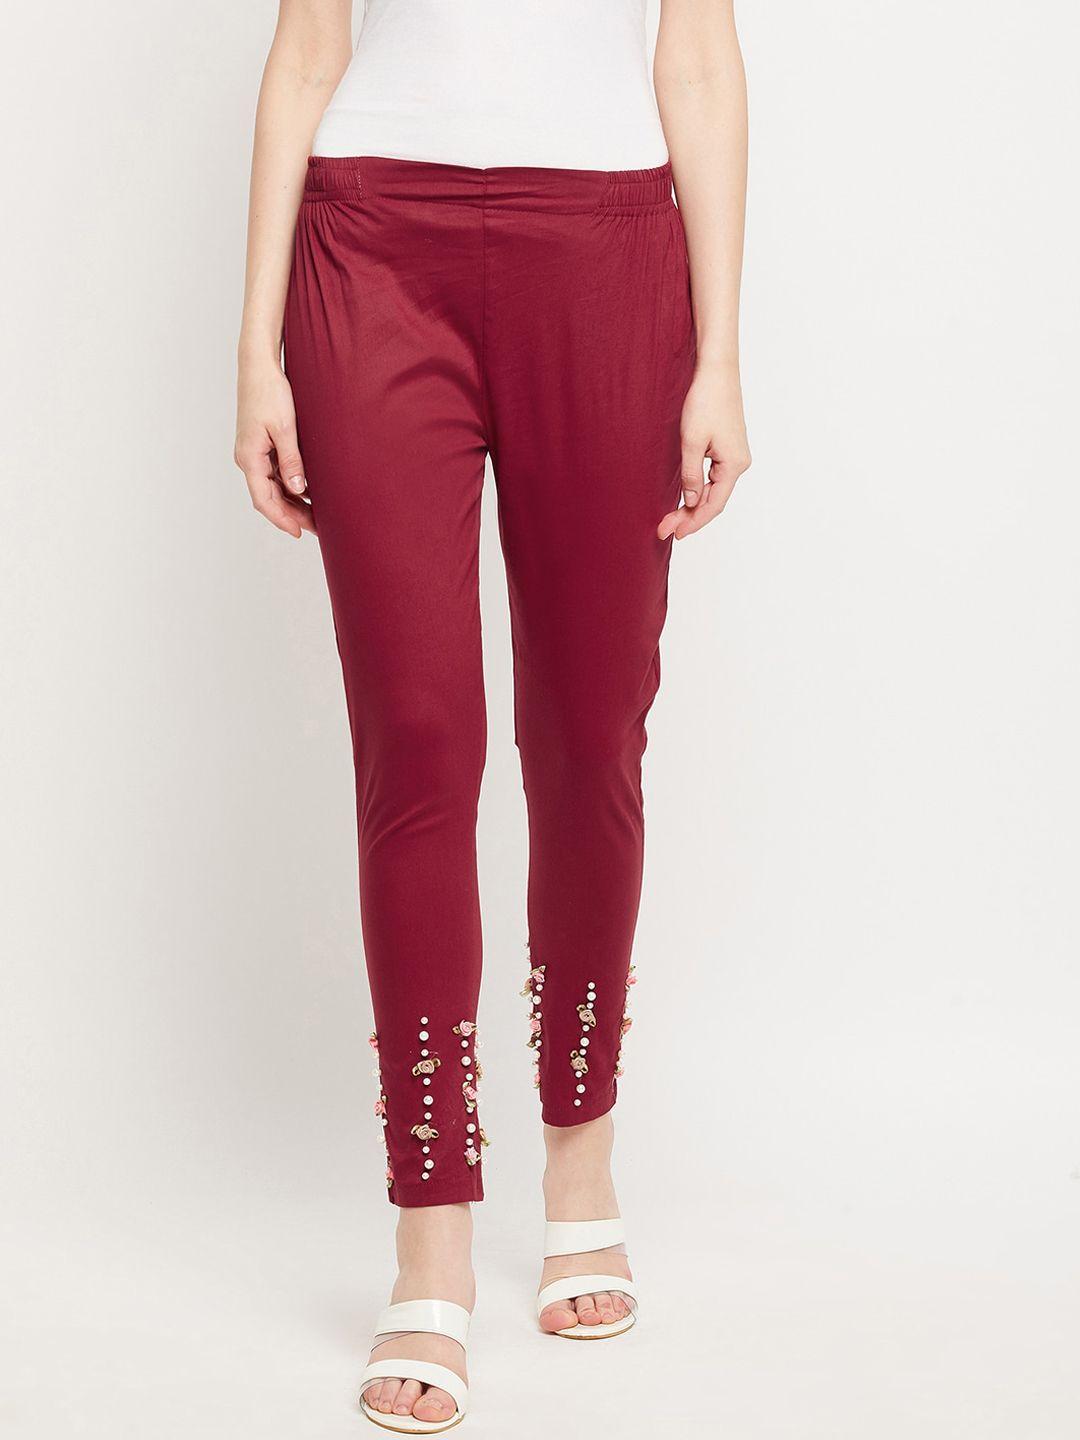 clora-creation-women-maroon-floral-embellished-smart-slim-fit-easy-wash-trousers